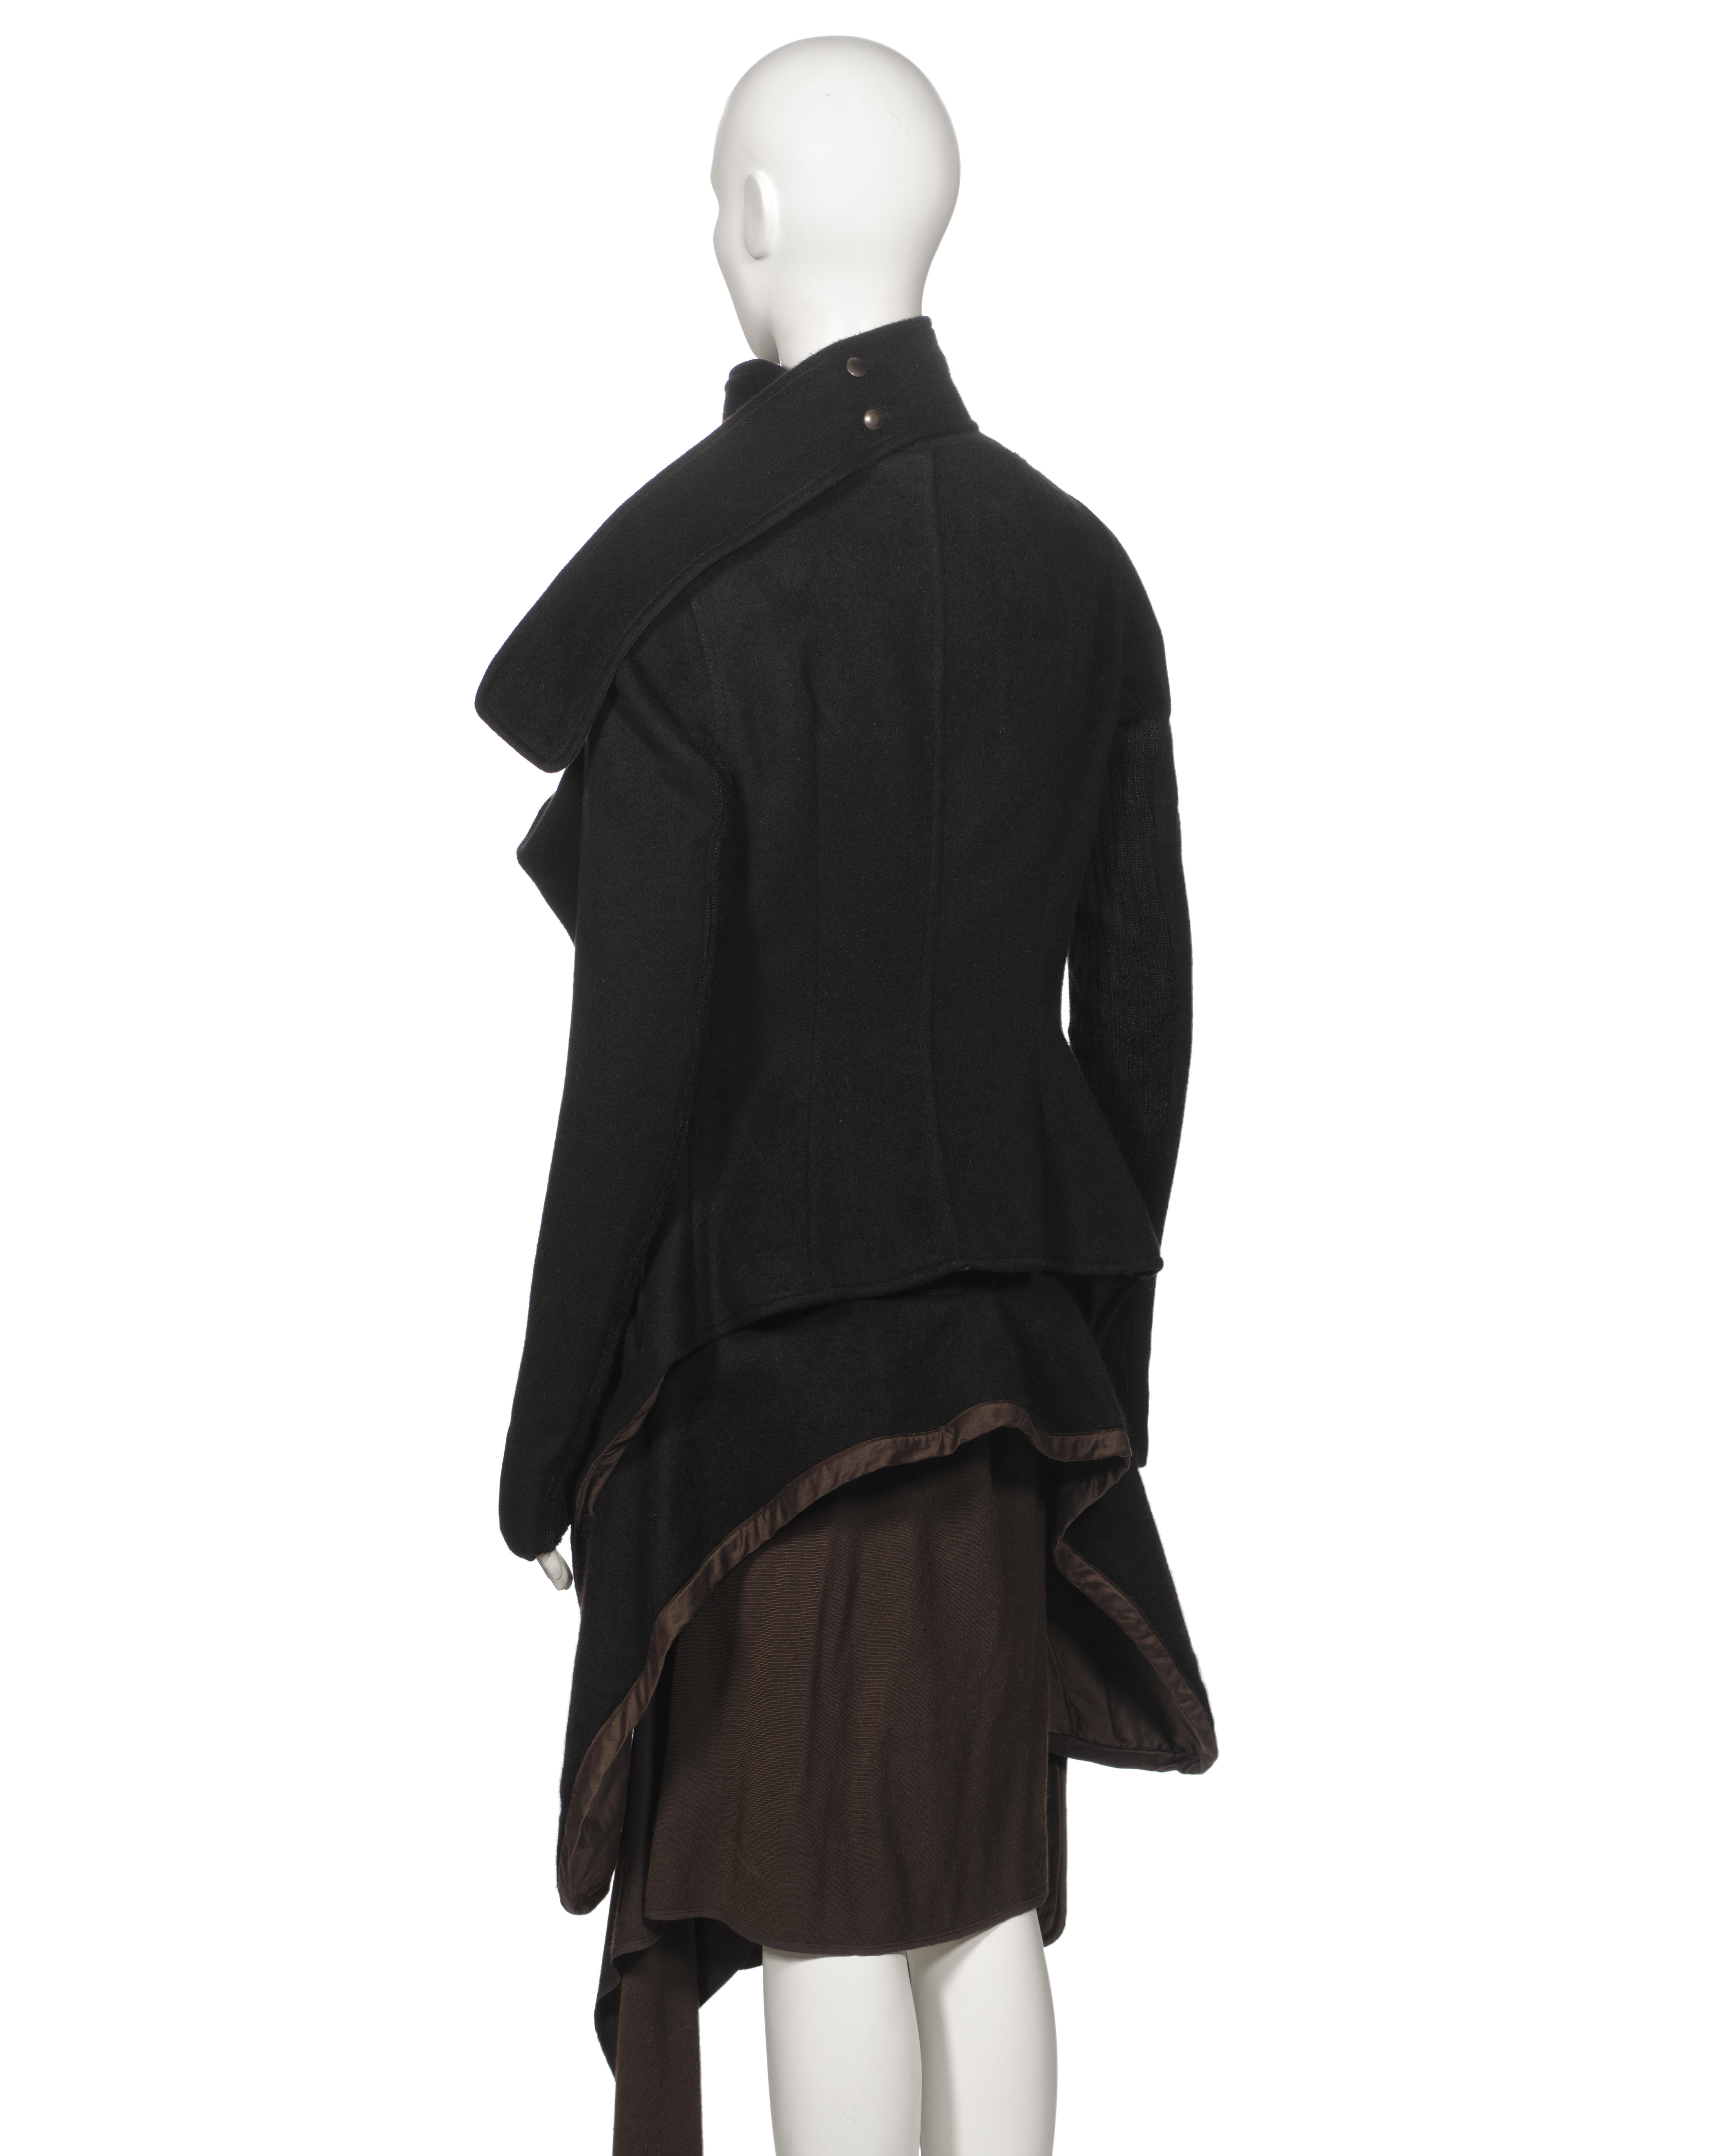 Rick Owens Angora Jacket and Cashmere Skirt 'Queen' Ensemble, fw 2004 For Sale 9